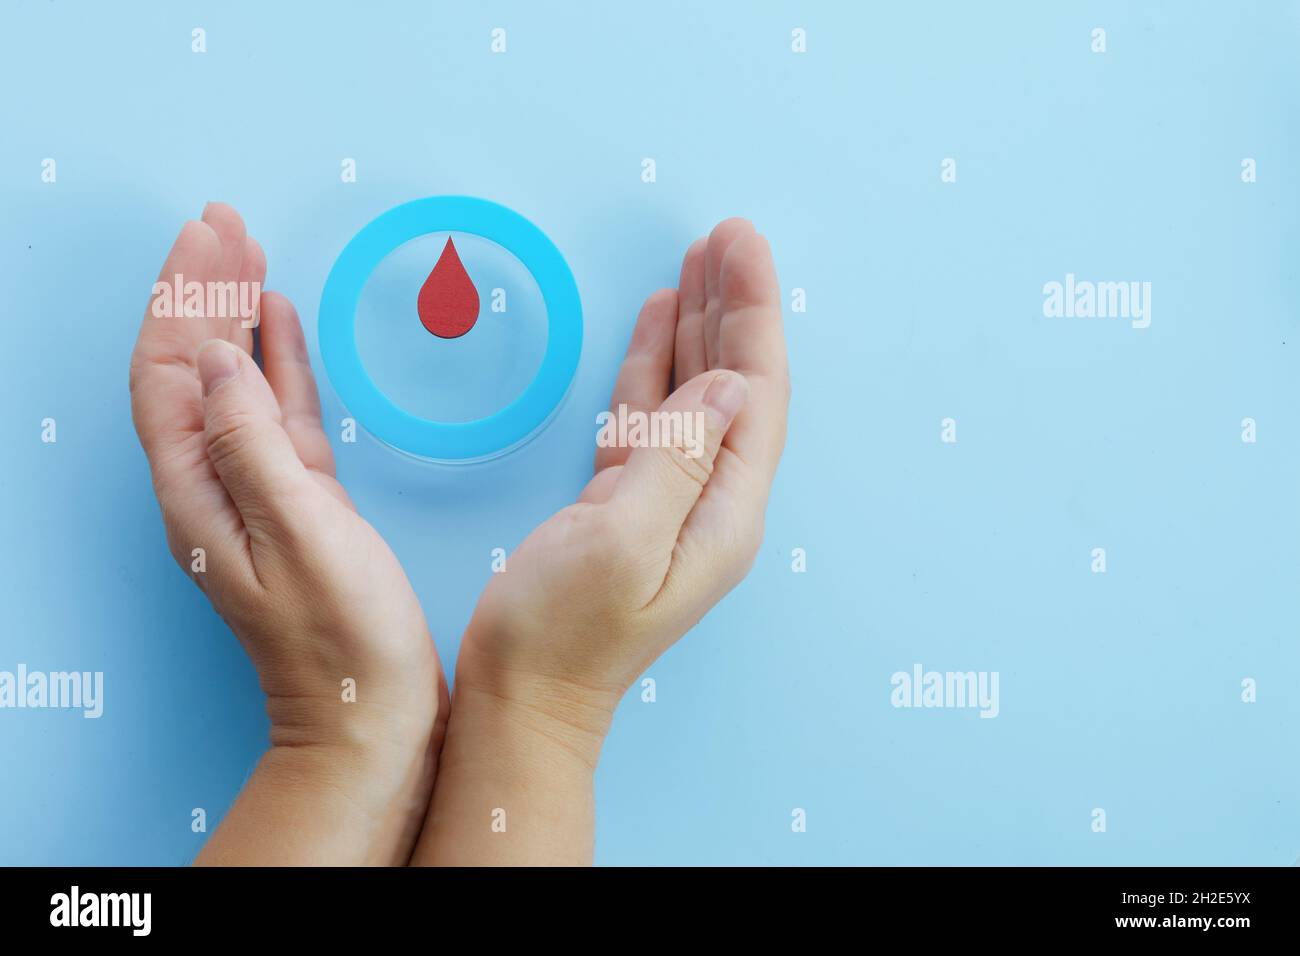 World diabetes day awareness. Woman hands with a blue circle with blood drop, symbol of the diabetes. Stock Photo